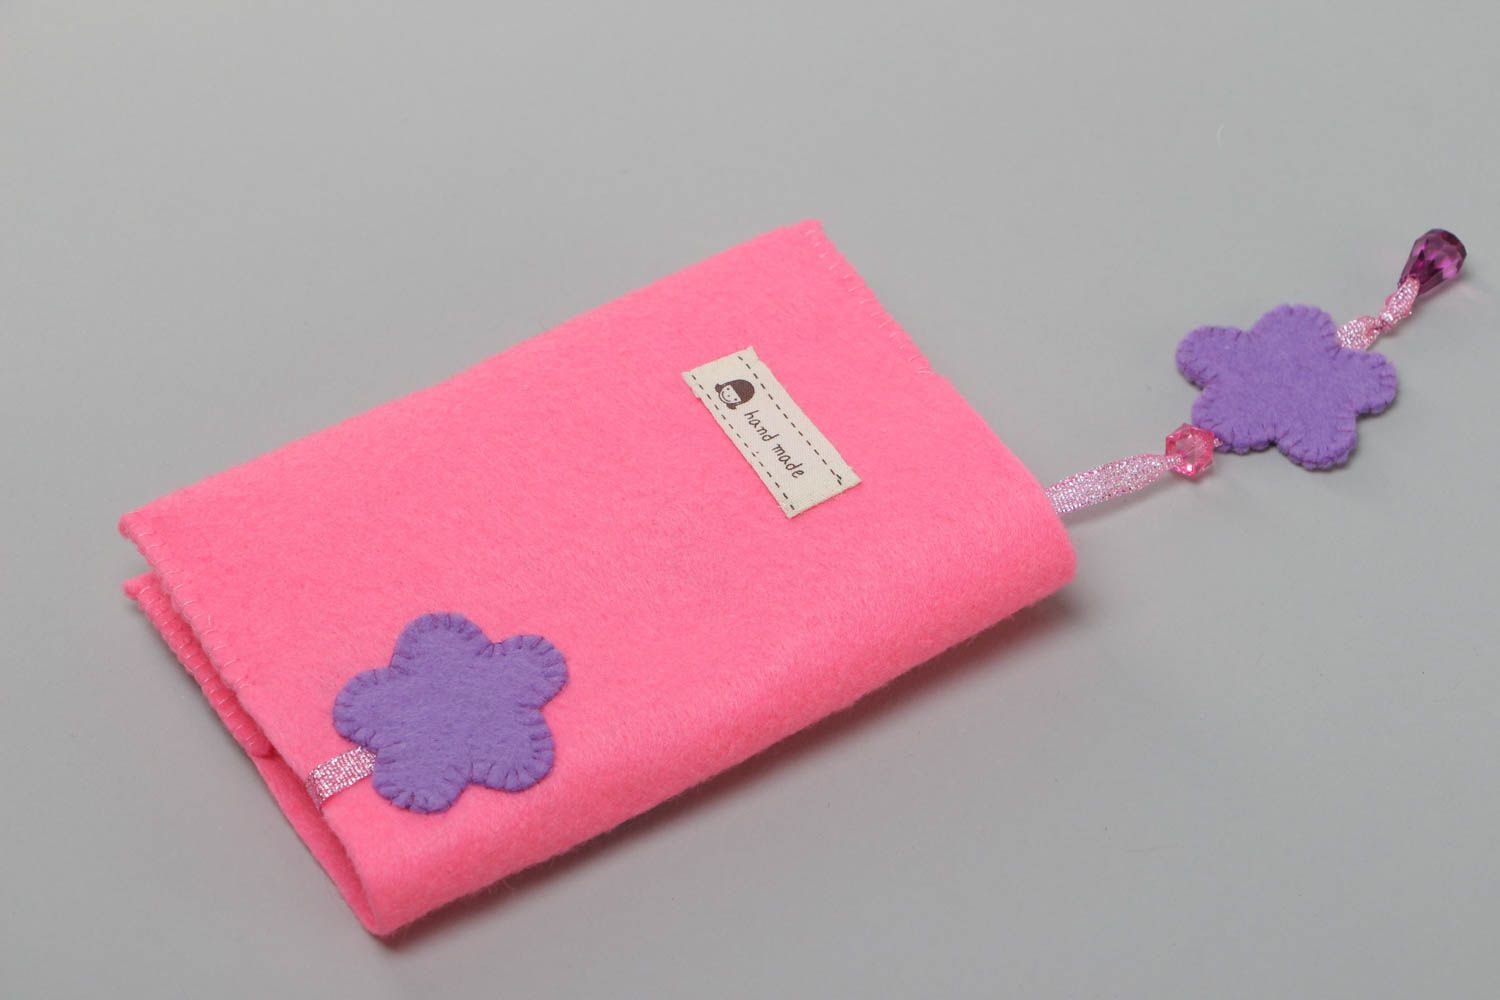 Handmade decorative passport cover sewn of pink felt with image of bear for girl photo 4